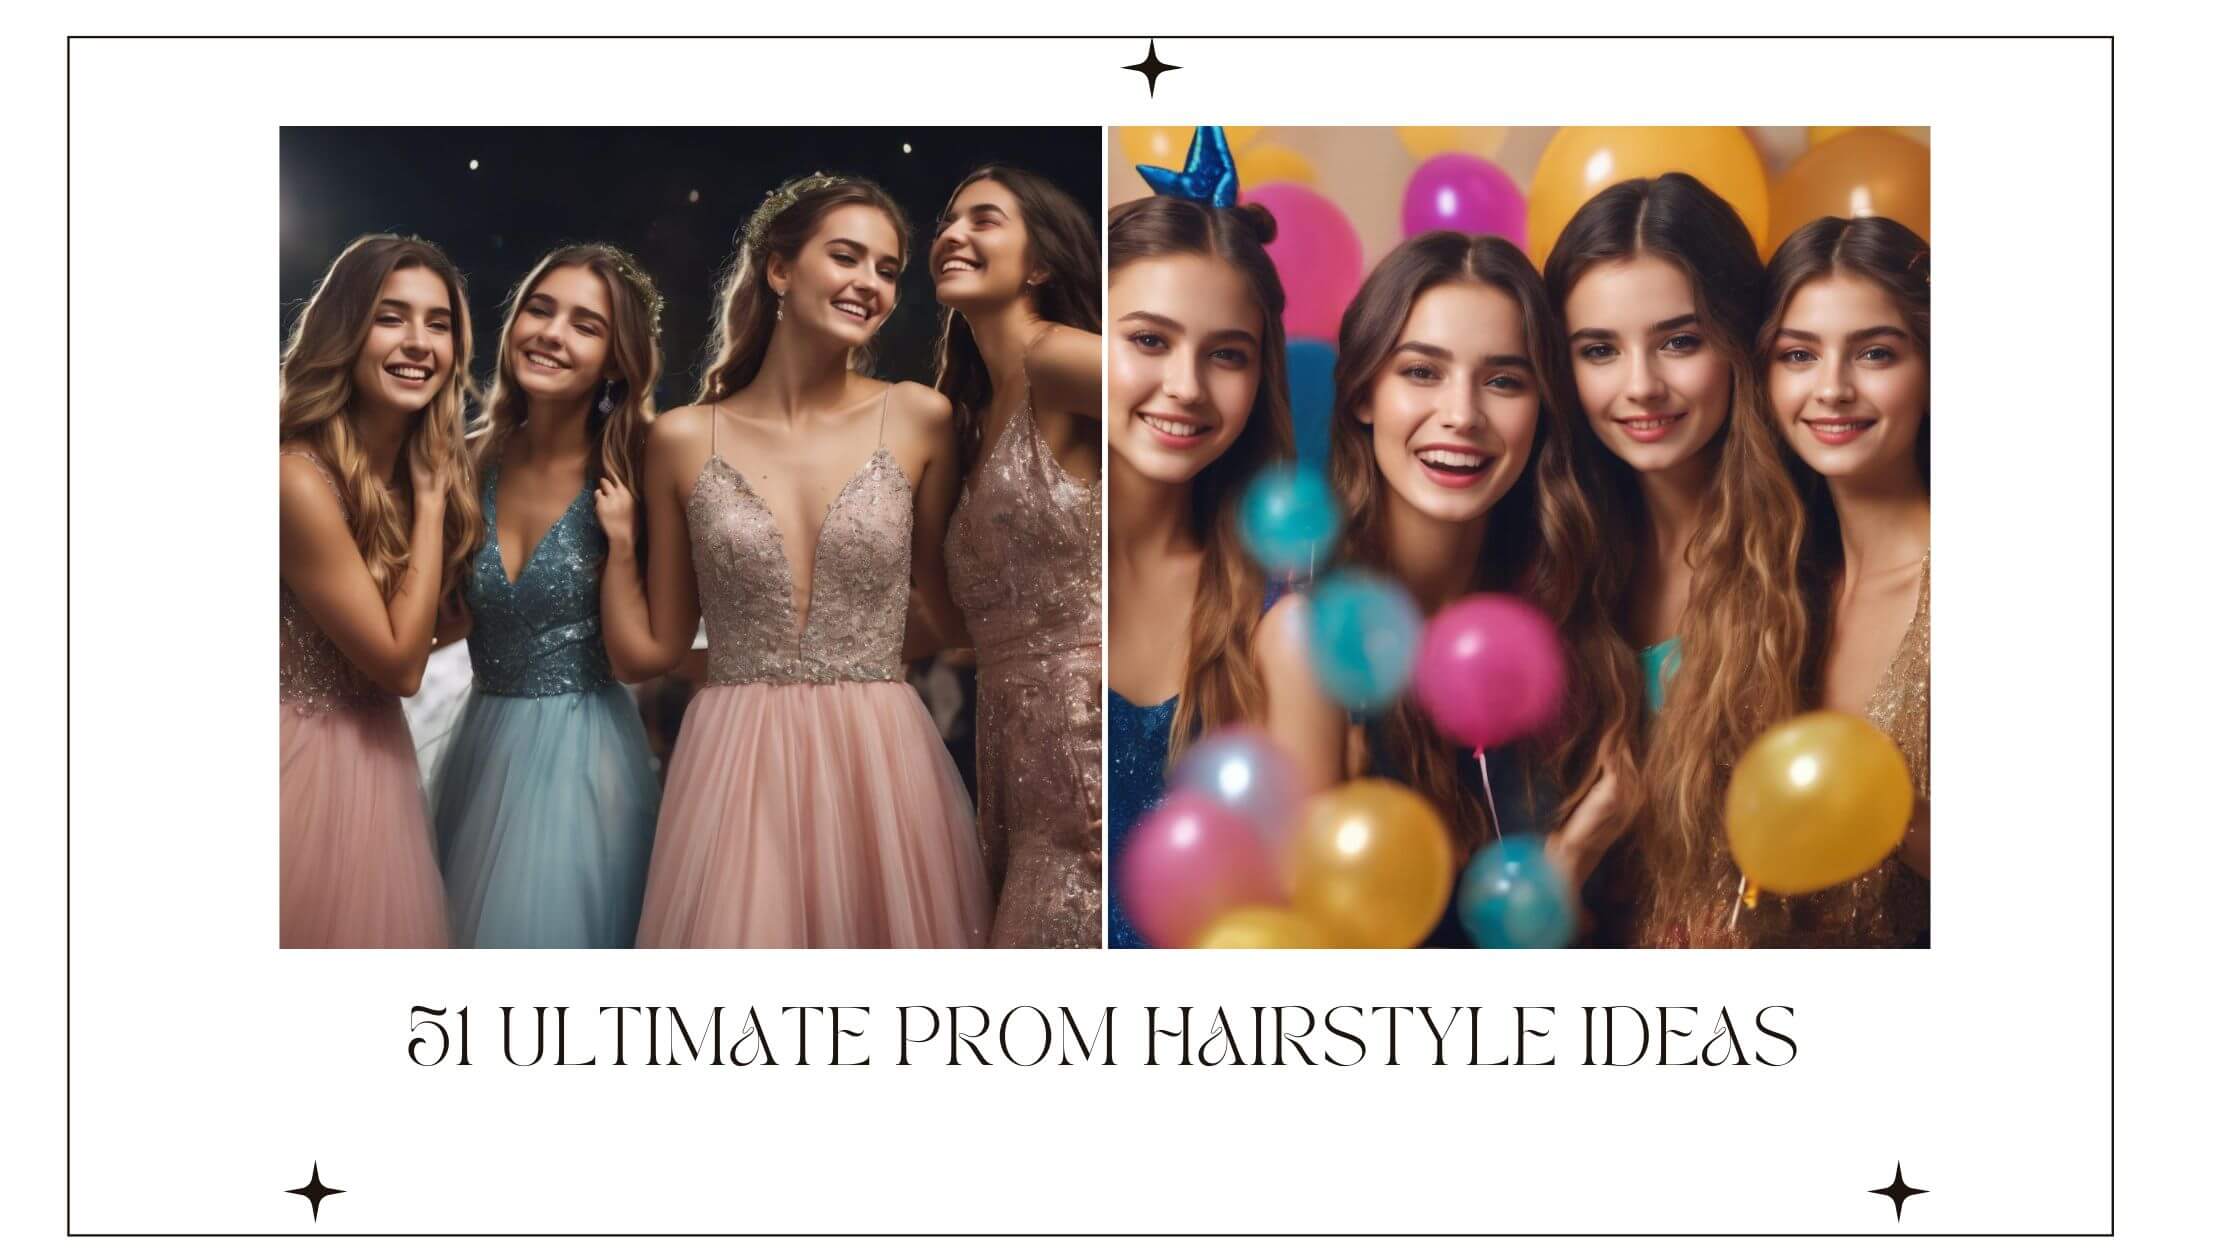 51 Ultimate Prom Hairstyle Ideas for Your Medium-Length Hair